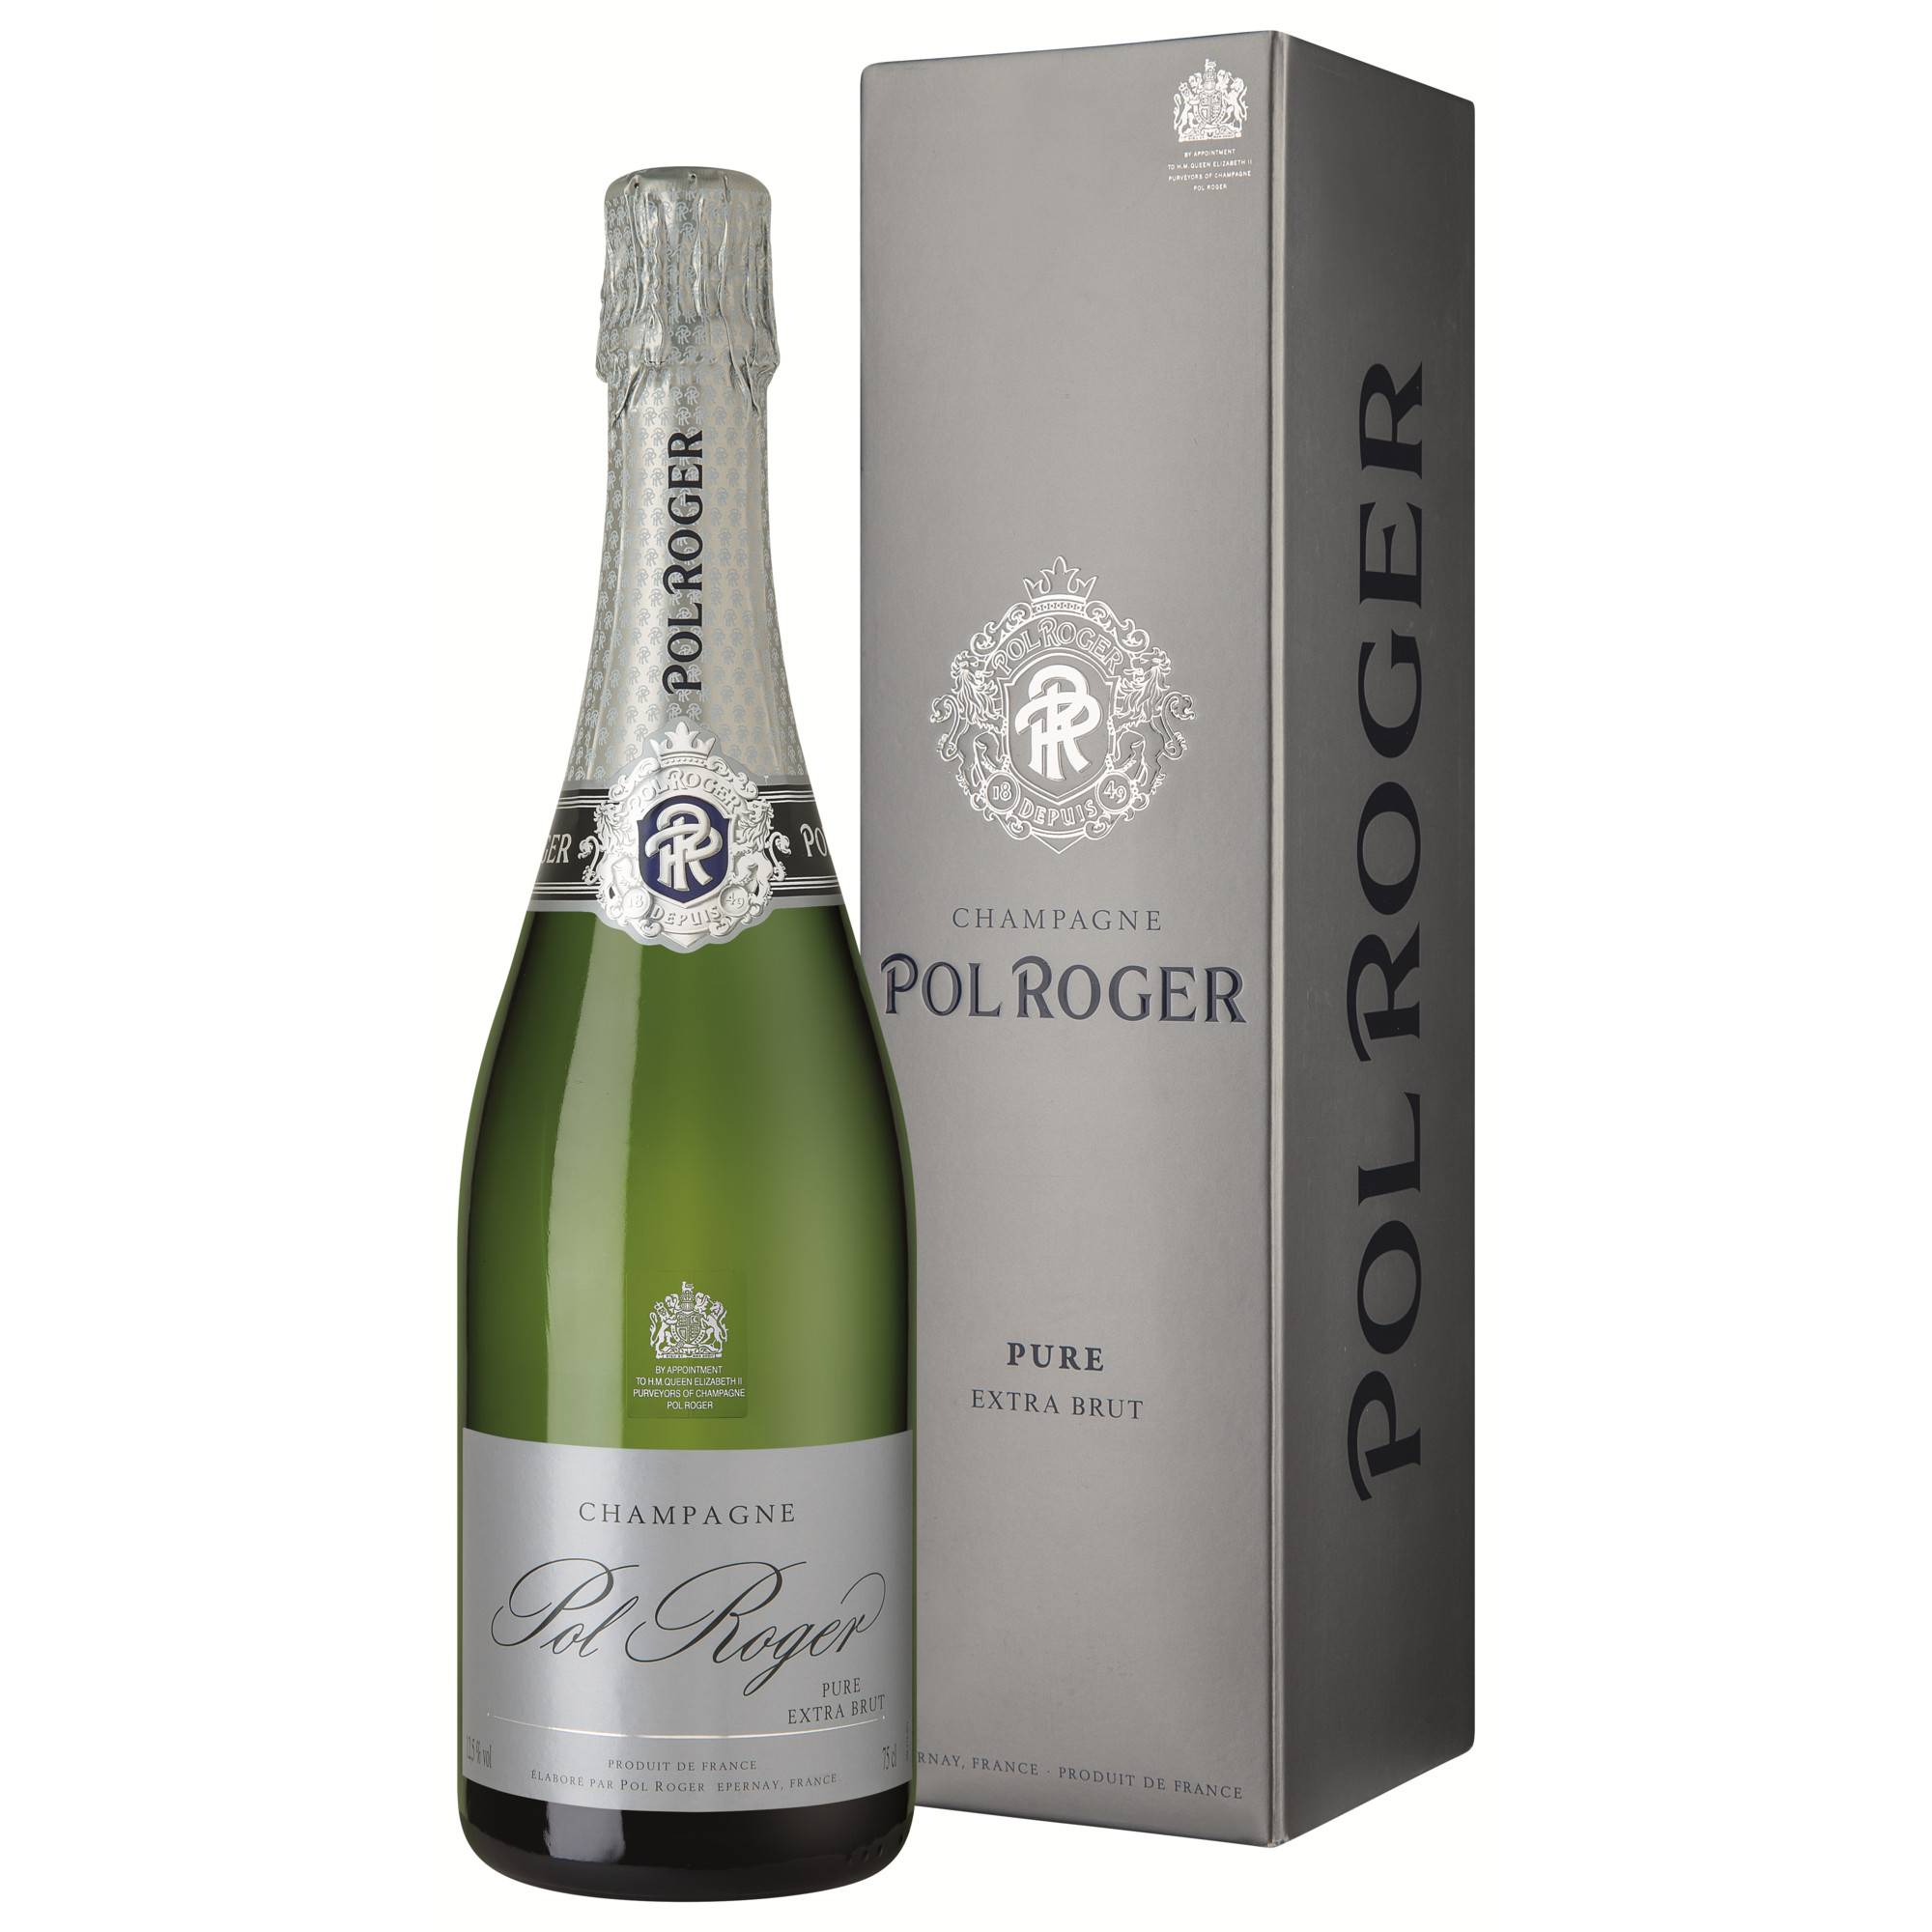 Champagne Pol Roger Pure